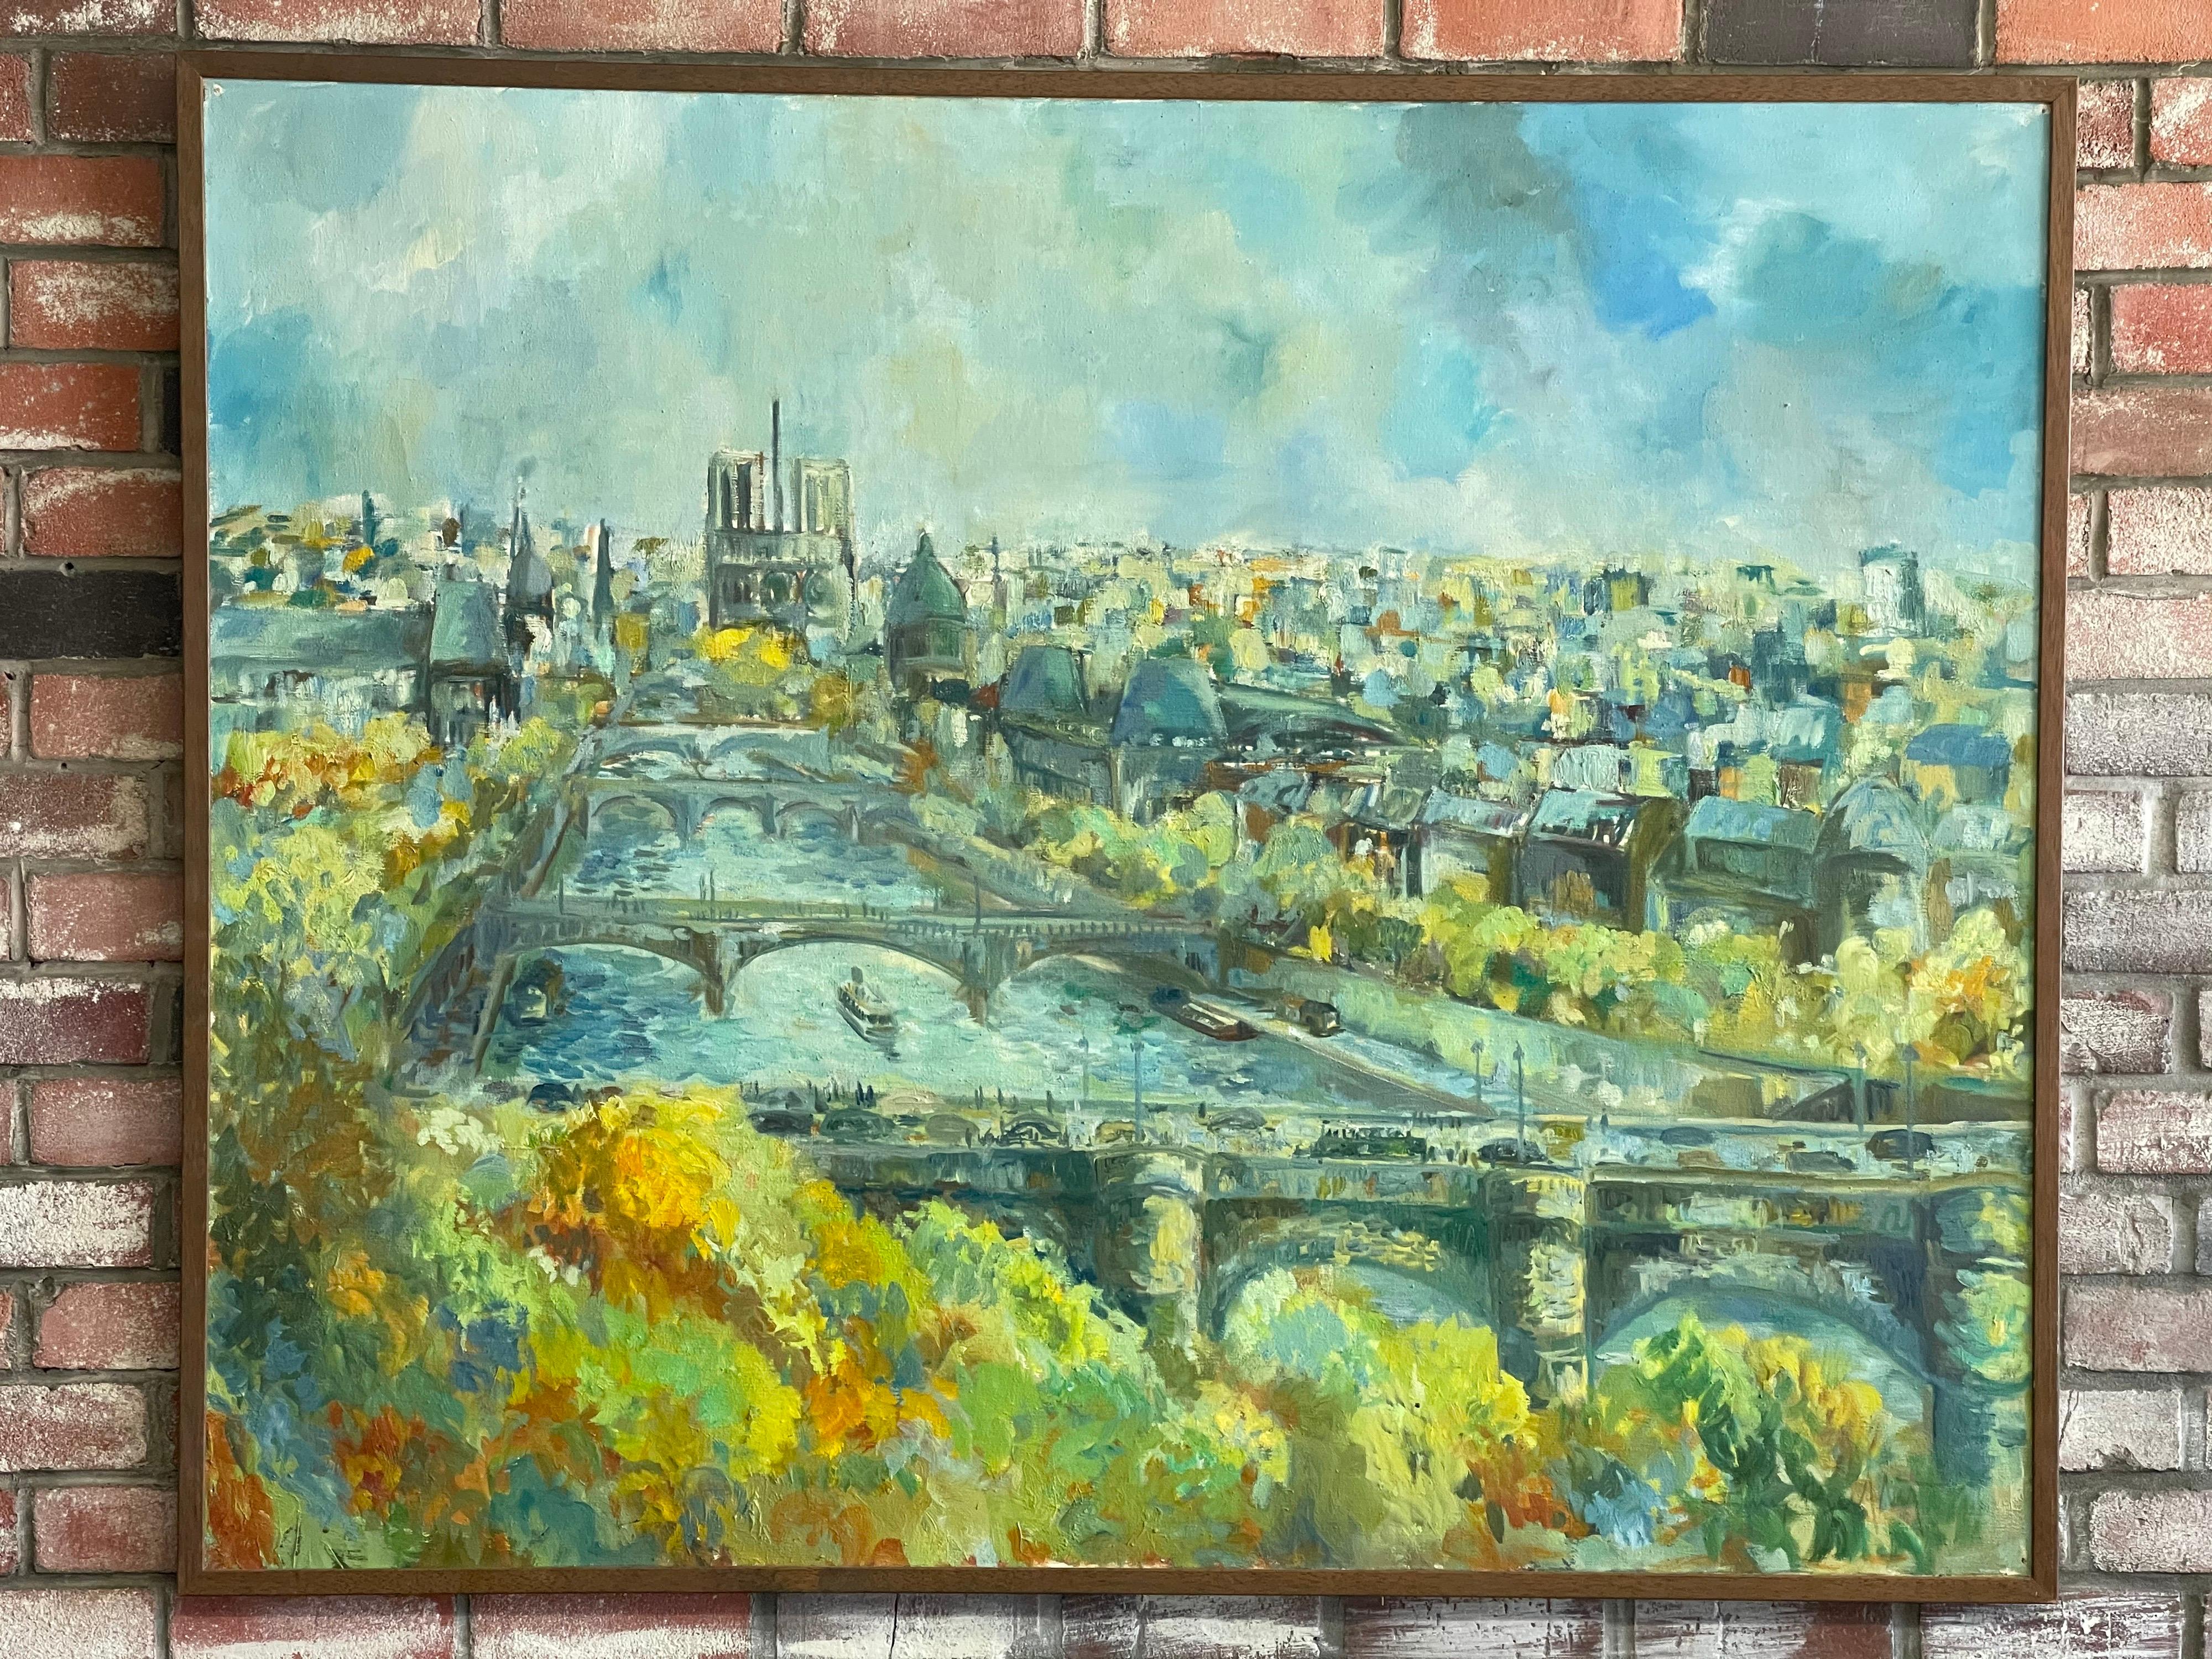 Gorgeous original oil on canvas cityscape of Paris, France by noted artist Guy Buffett, circa 1970s. The large painting depicts a view down the Seine river toward Notre Dame cathedral; wonderful use of color and brush strokes to capture the energy